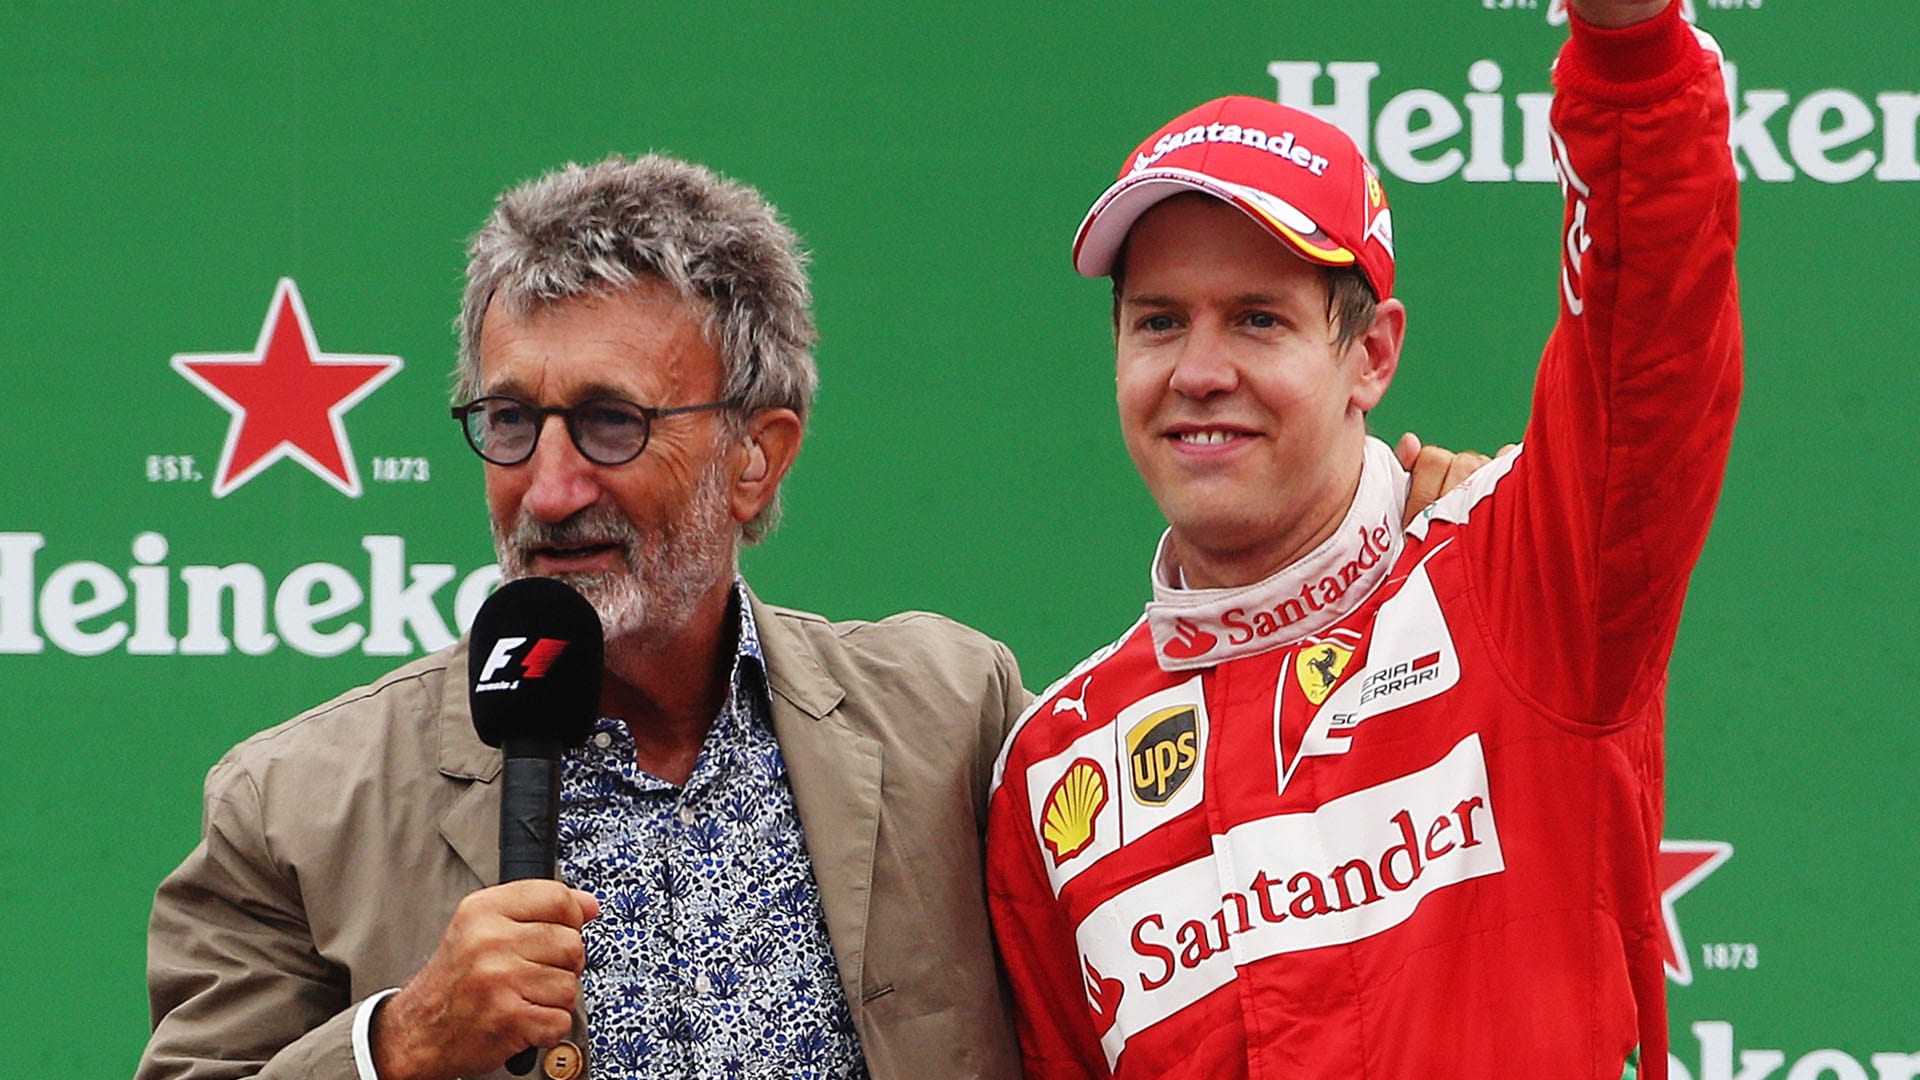 Would I employ Probably not' – Eddie Jordan on the prospect of Vettel joining Racing Point | Formula 1®